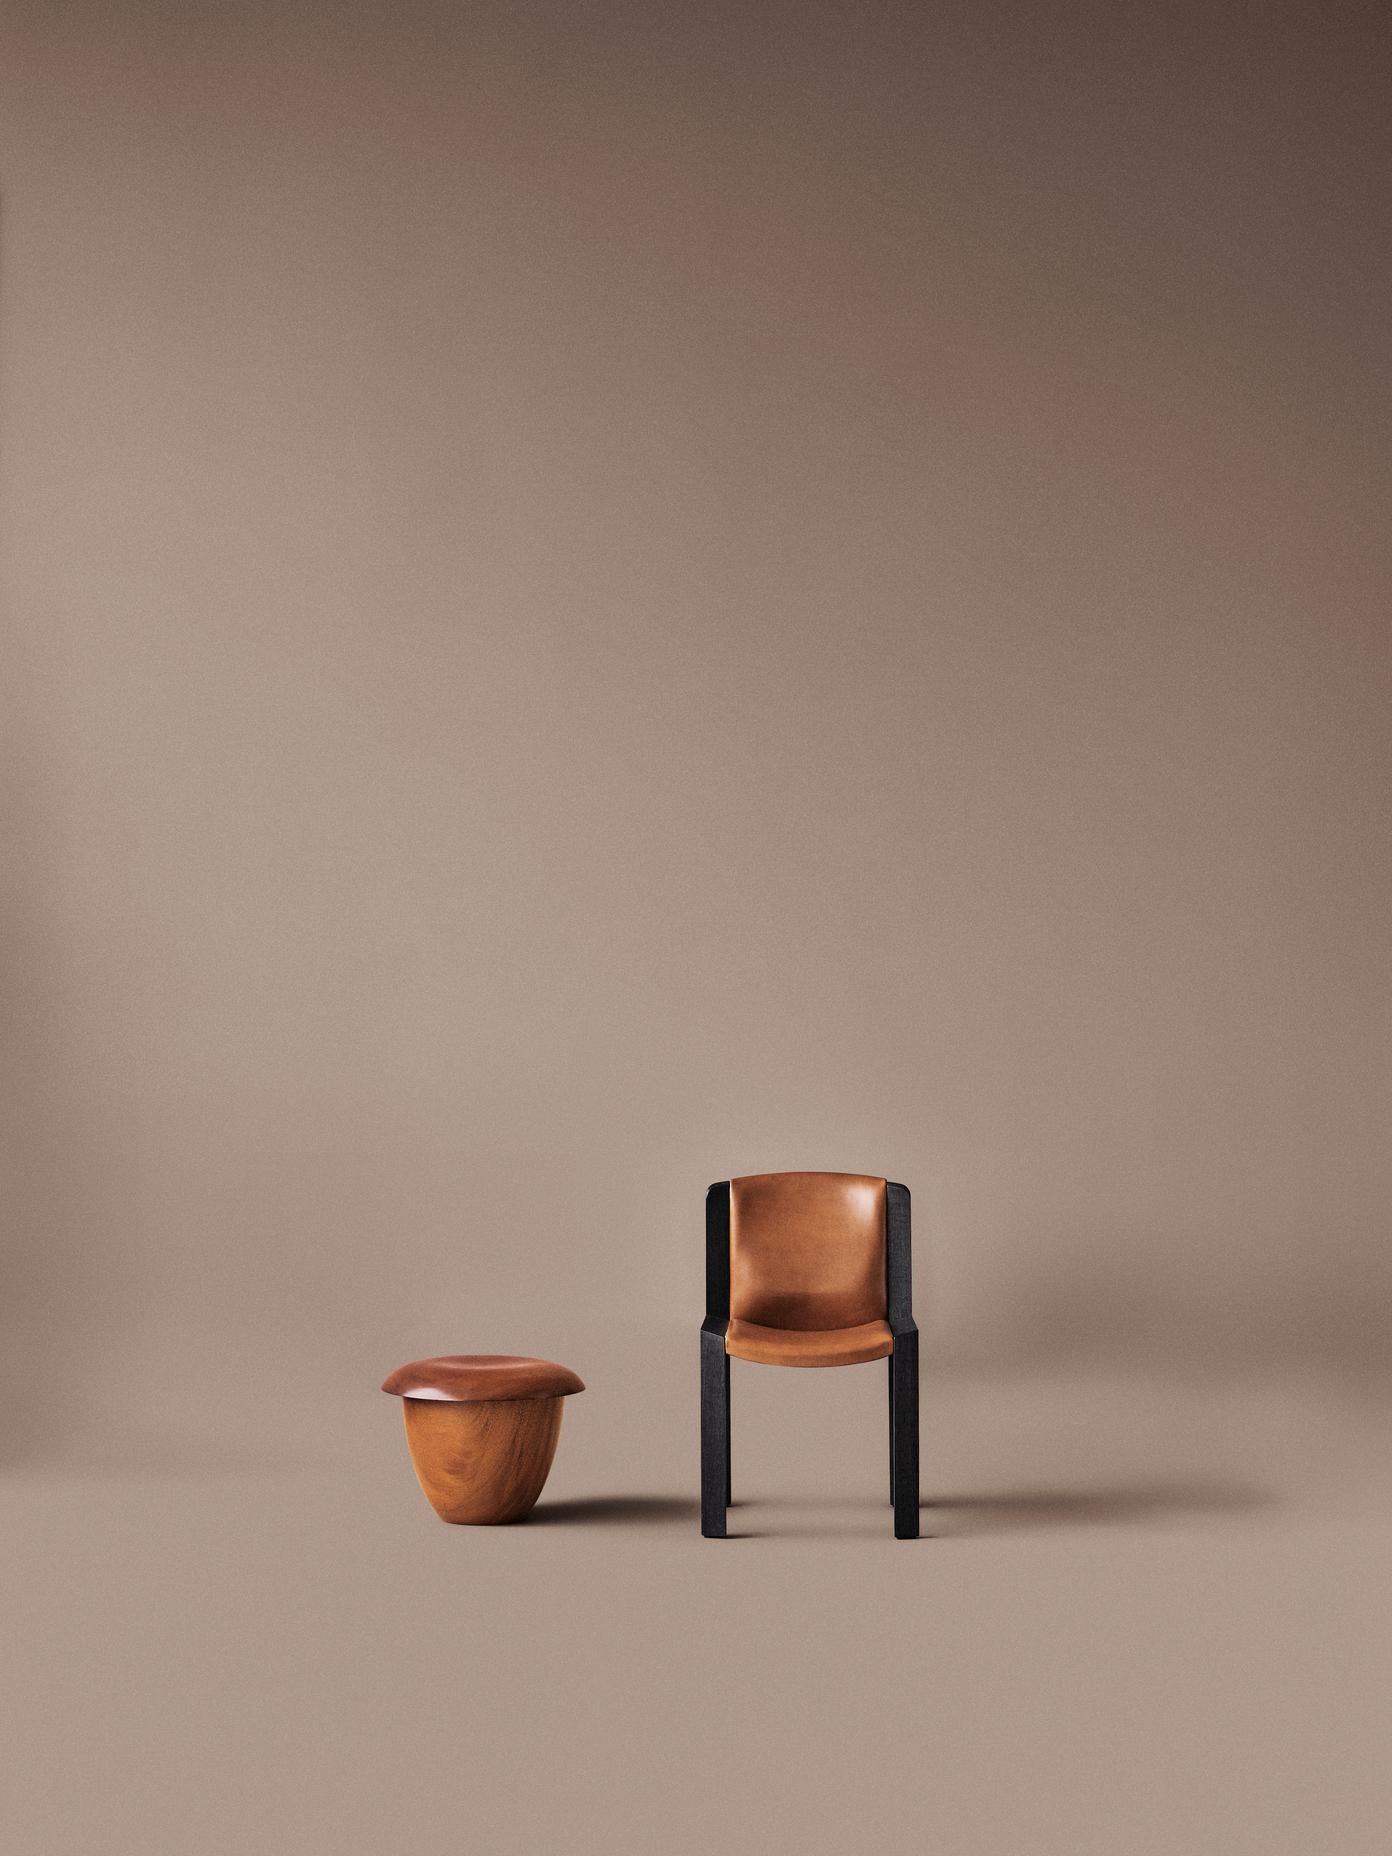 Joe Colombo 'Chair 300' Wood and Sørensen Leather by Karakter For Sale 1